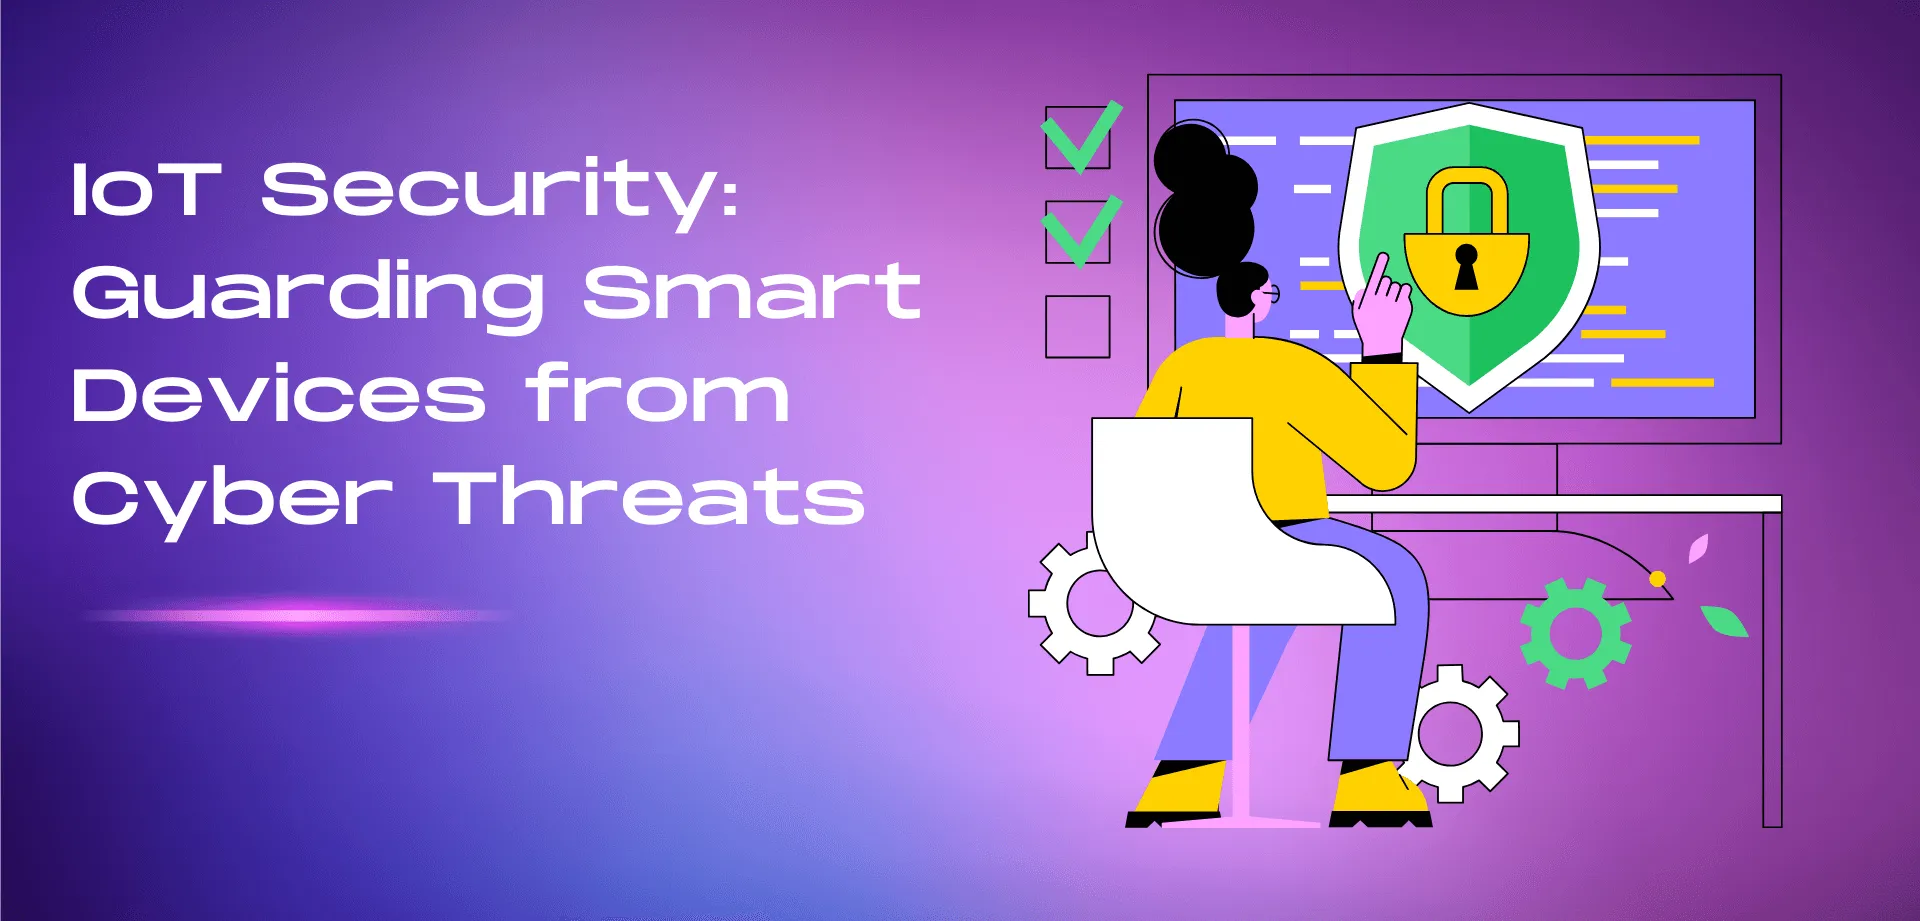 IoT Security Guarding Smart Devices from Cyber Threats